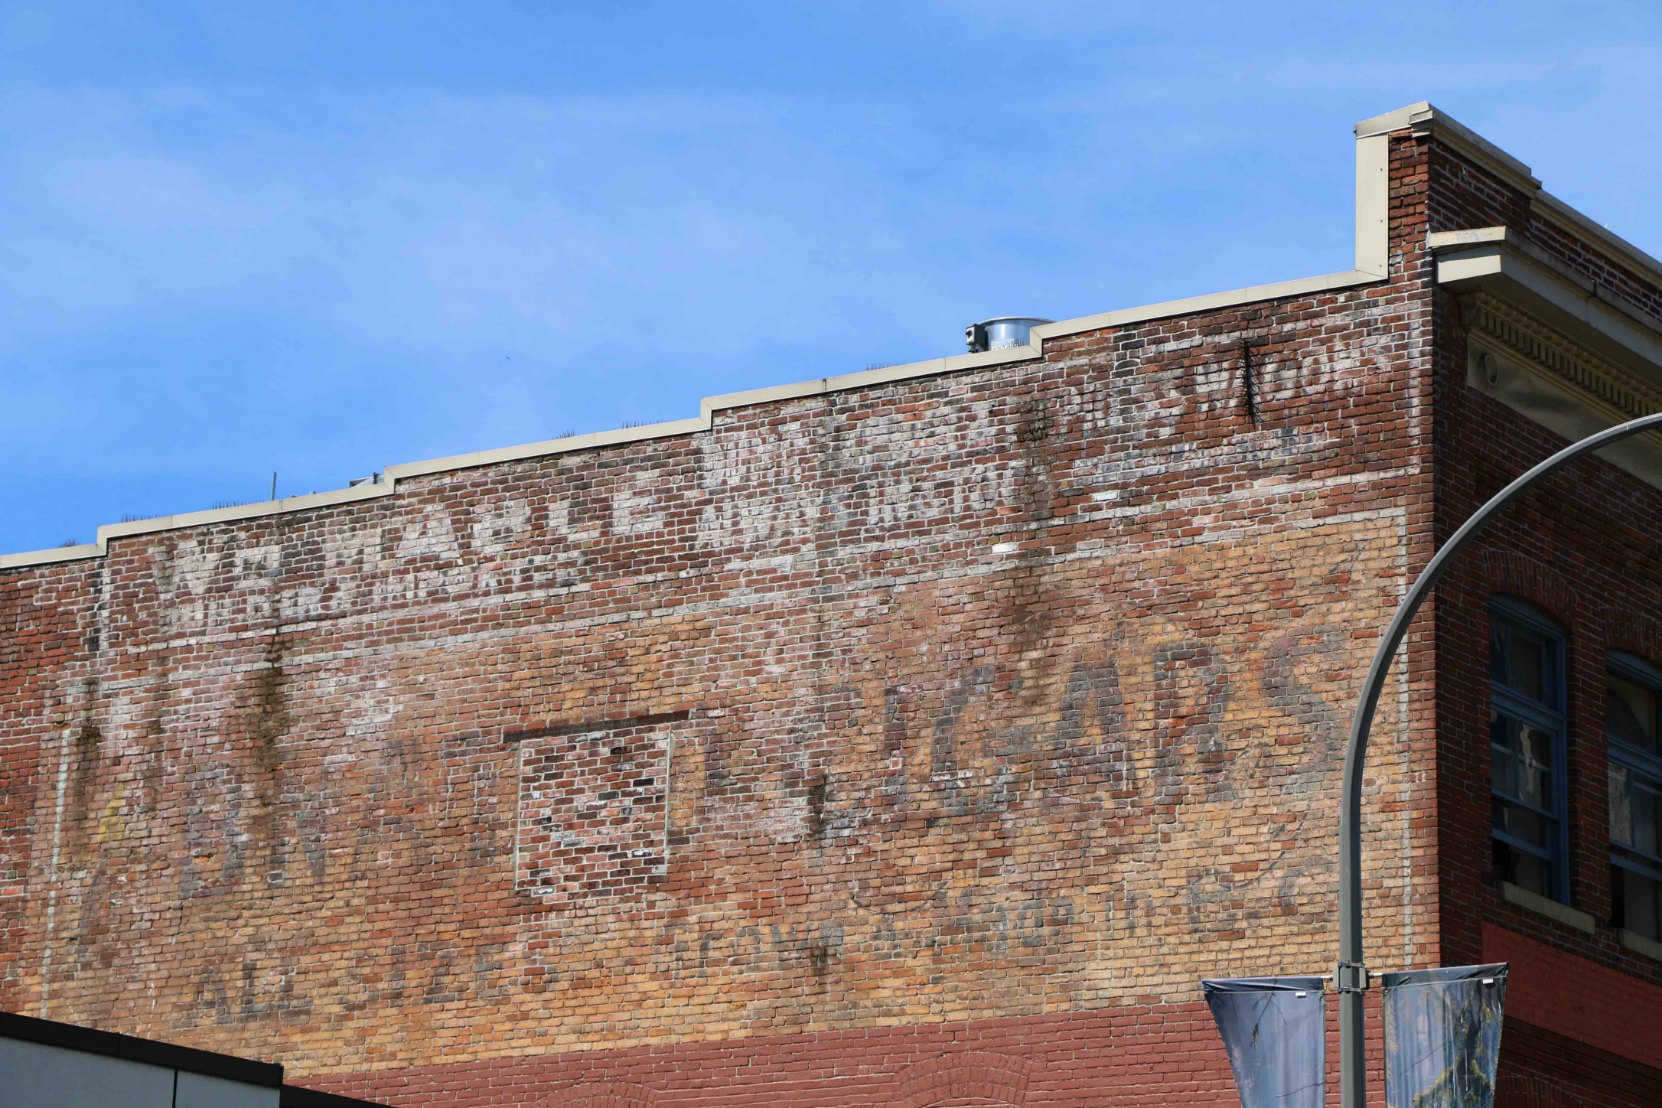 The east wall of 713-715 Johnson Street still shows the early 20th century painted signs for Mable Carriage Works and other businesses which operated in this building.